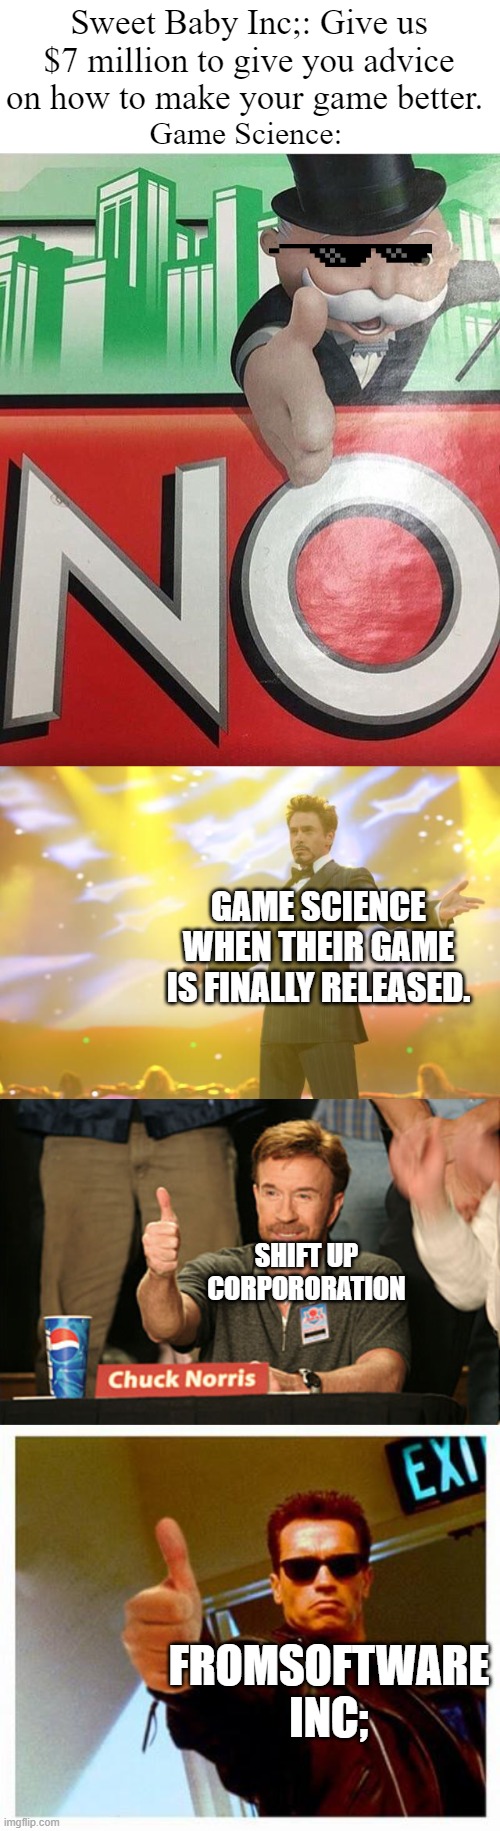 Best games. Havent played some yet. | Sweet Baby Inc;: Give us $7 million to give you advice on how to make your game better. Game Science:; GAME SCIENCE WHEN THEIR GAME IS FINALLY RELEASED. SHIFT UP CORPORORATION; FROMSOFTWARE INC; | image tagged in no monopoly,tony stark success,memes,chuck norris approves,terminator thumbs up | made w/ Imgflip meme maker